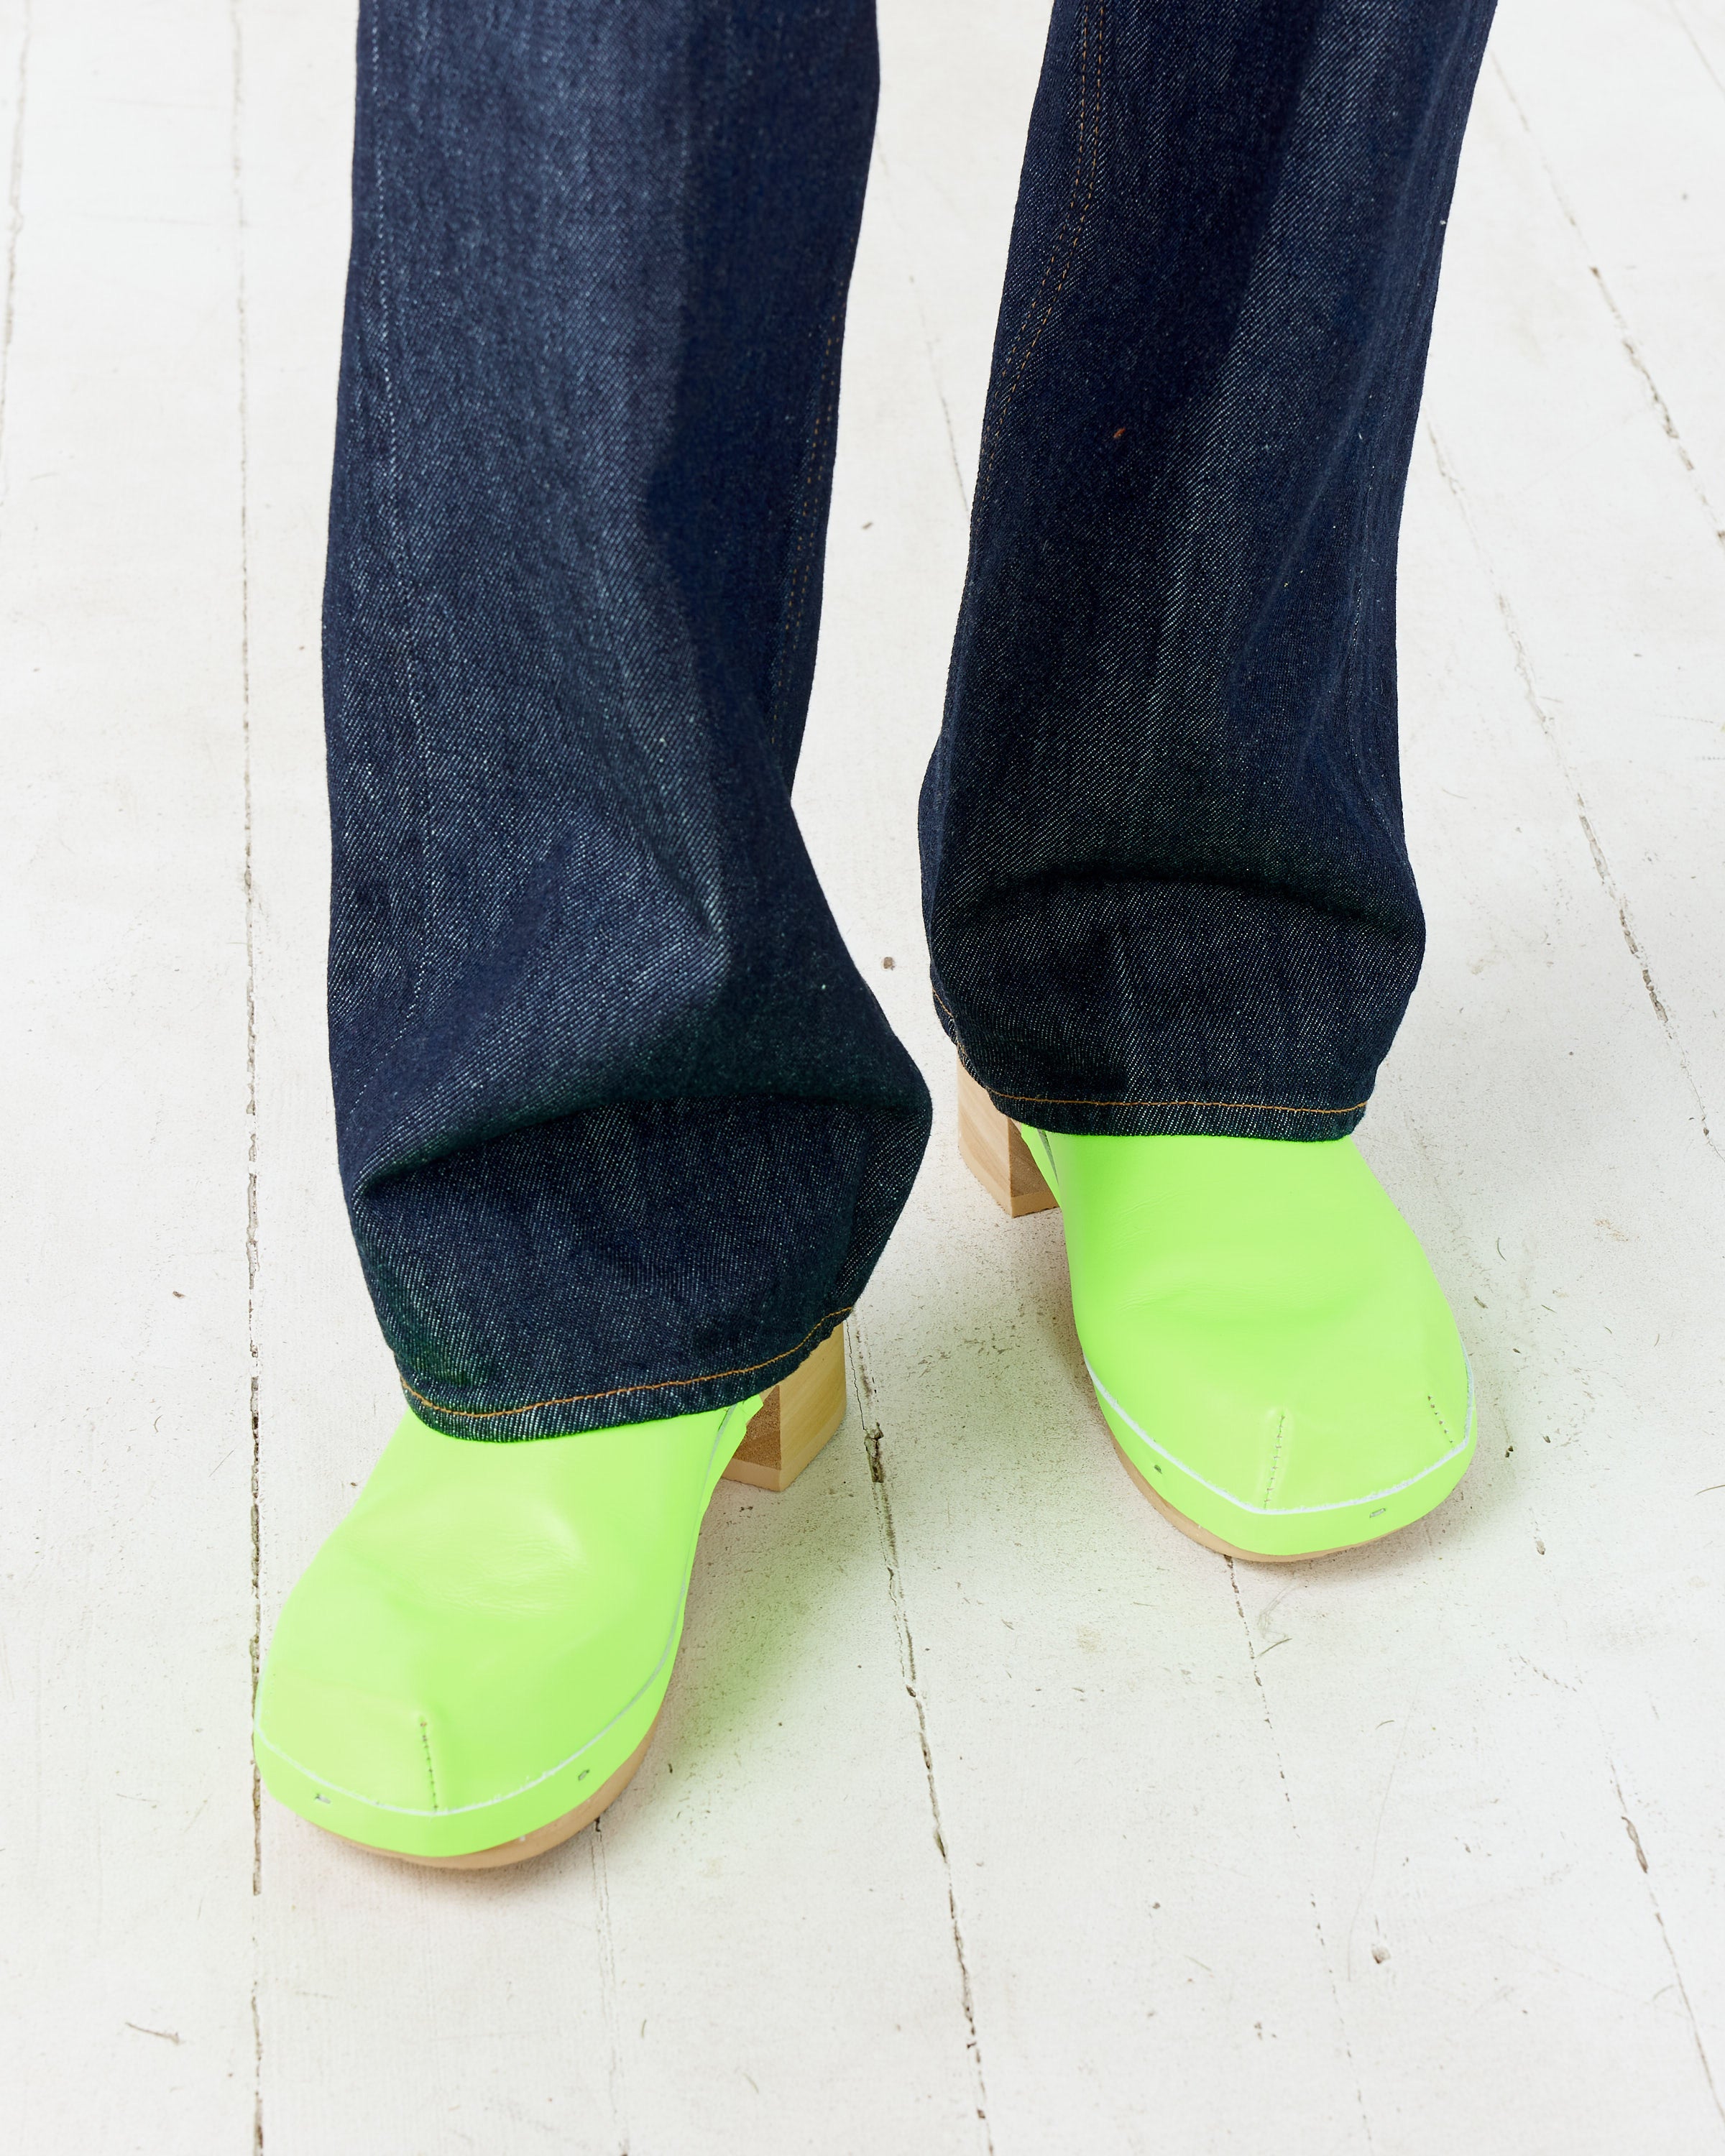 Rocco Geo Sandal in Lime